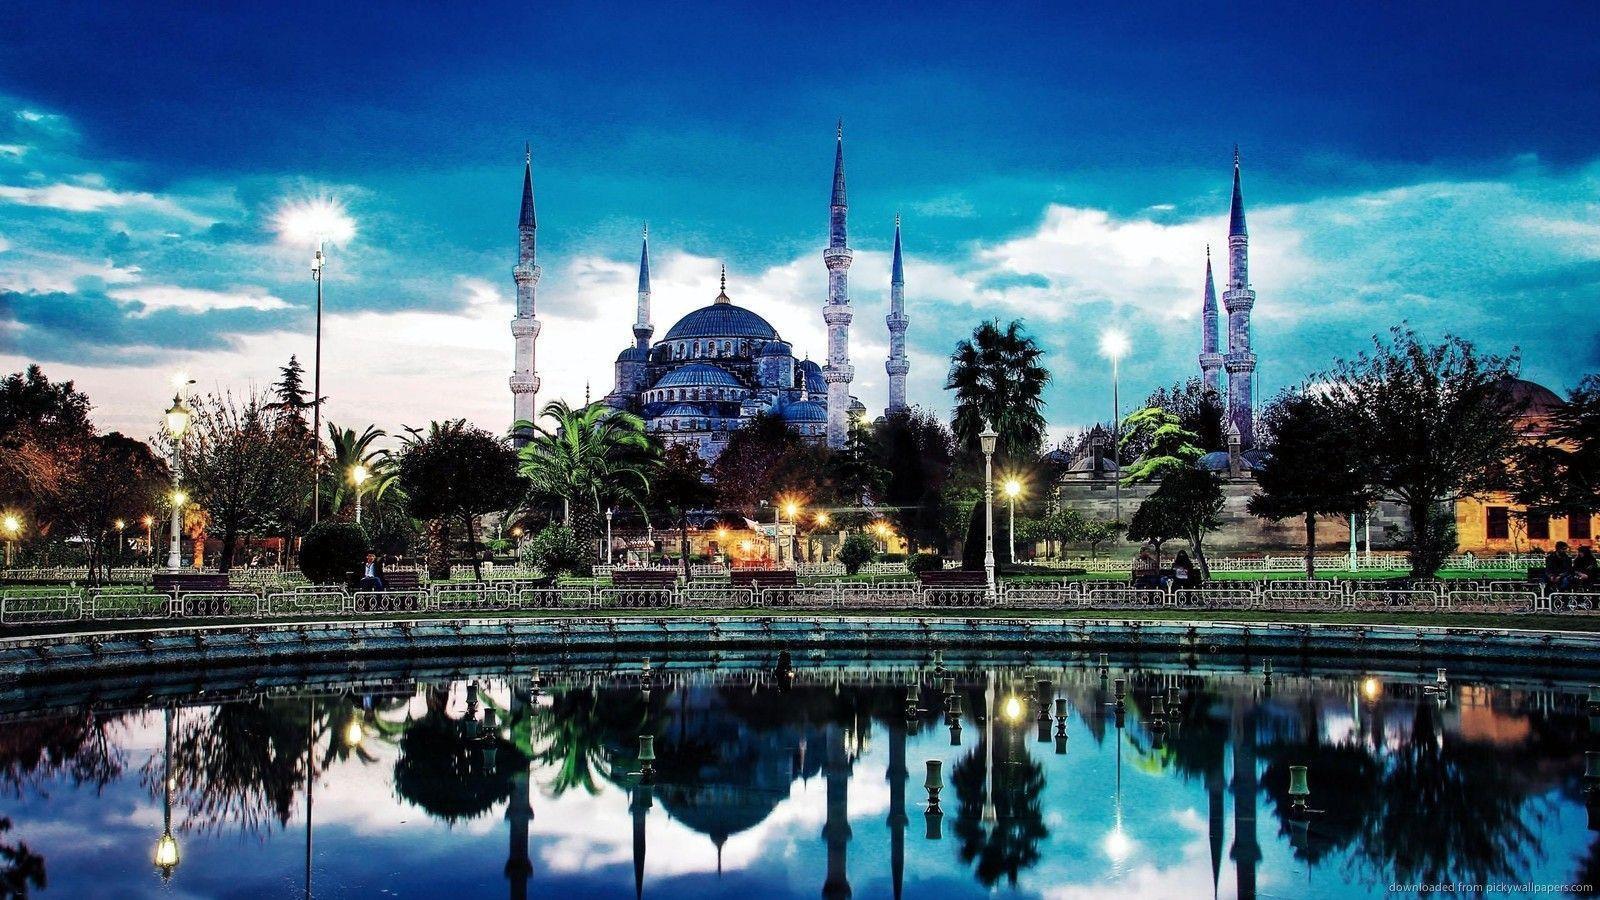 Download 1600x900 Sultan Ahmed Mosque Wallpaper